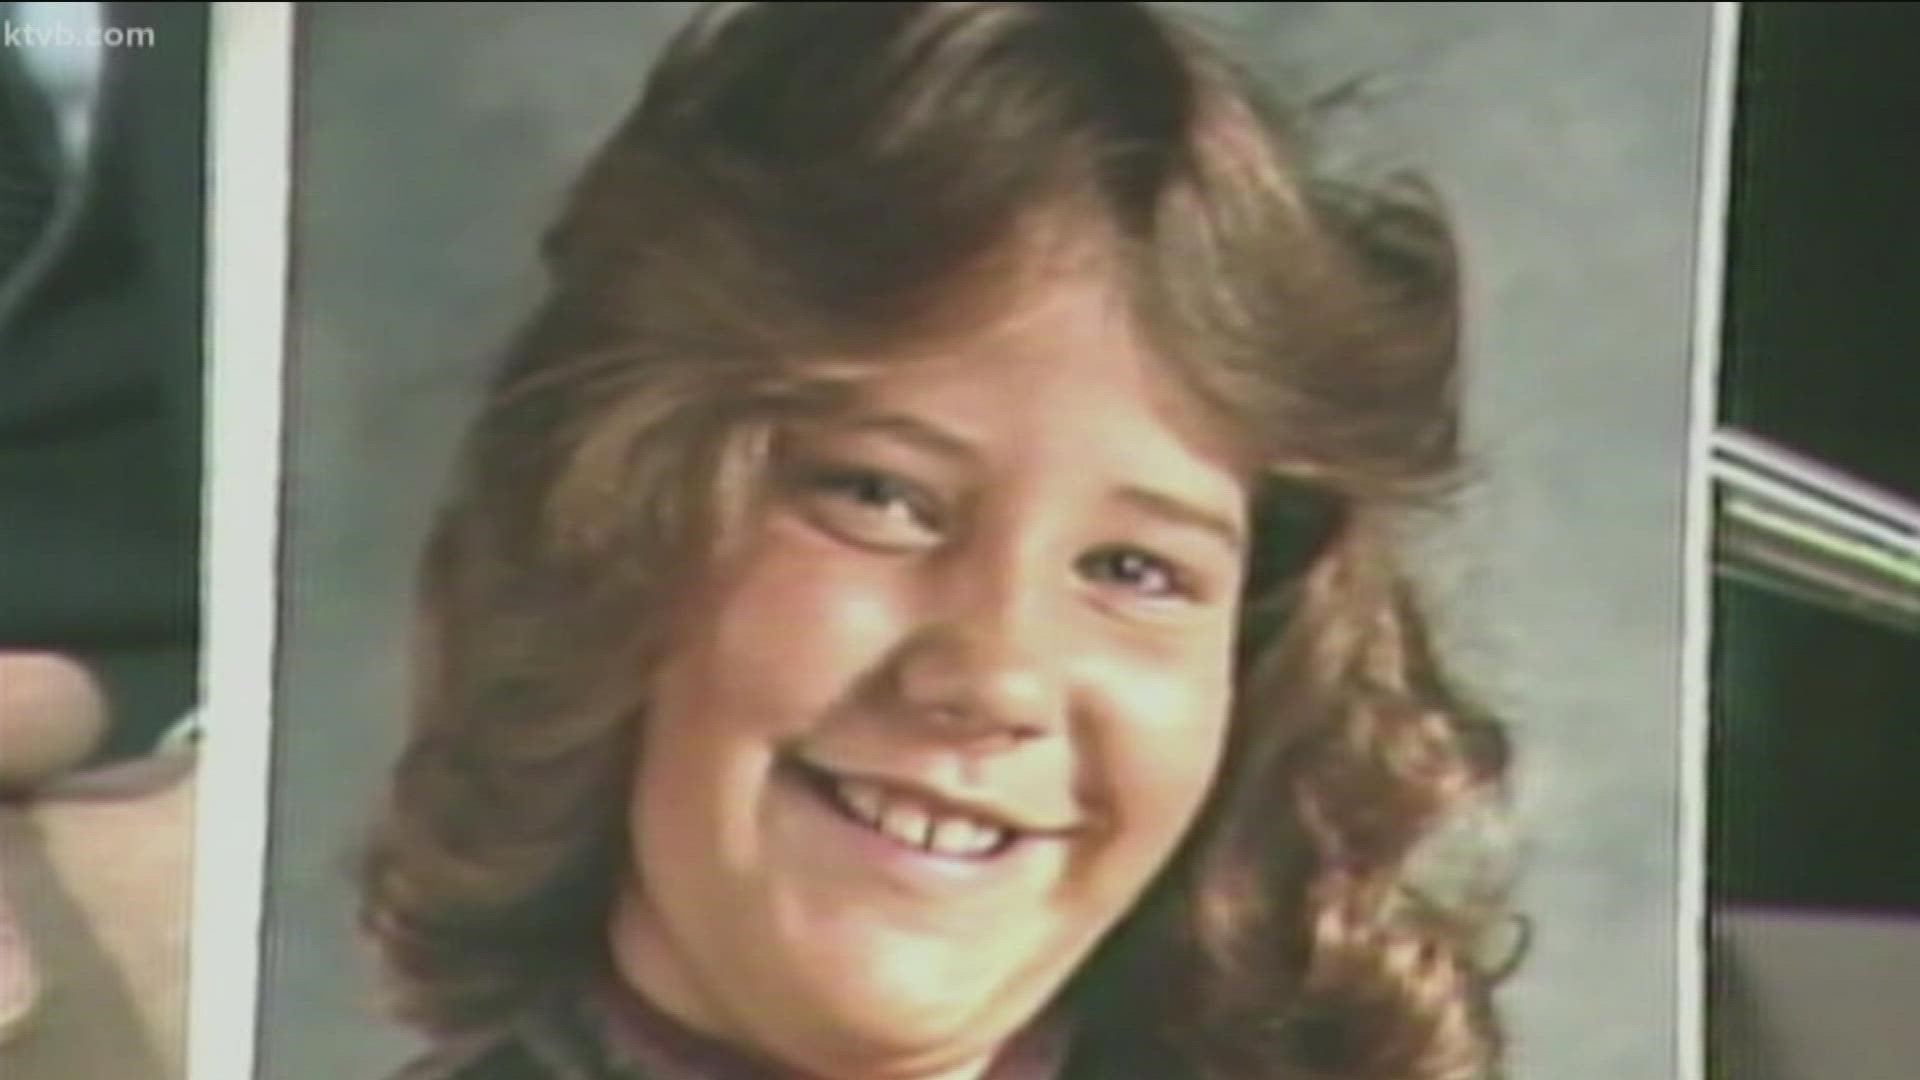 Daralyn Johnson was found dead in 1982. David Dalrymple was charged, nearly 40 years later, with her rape and murder.